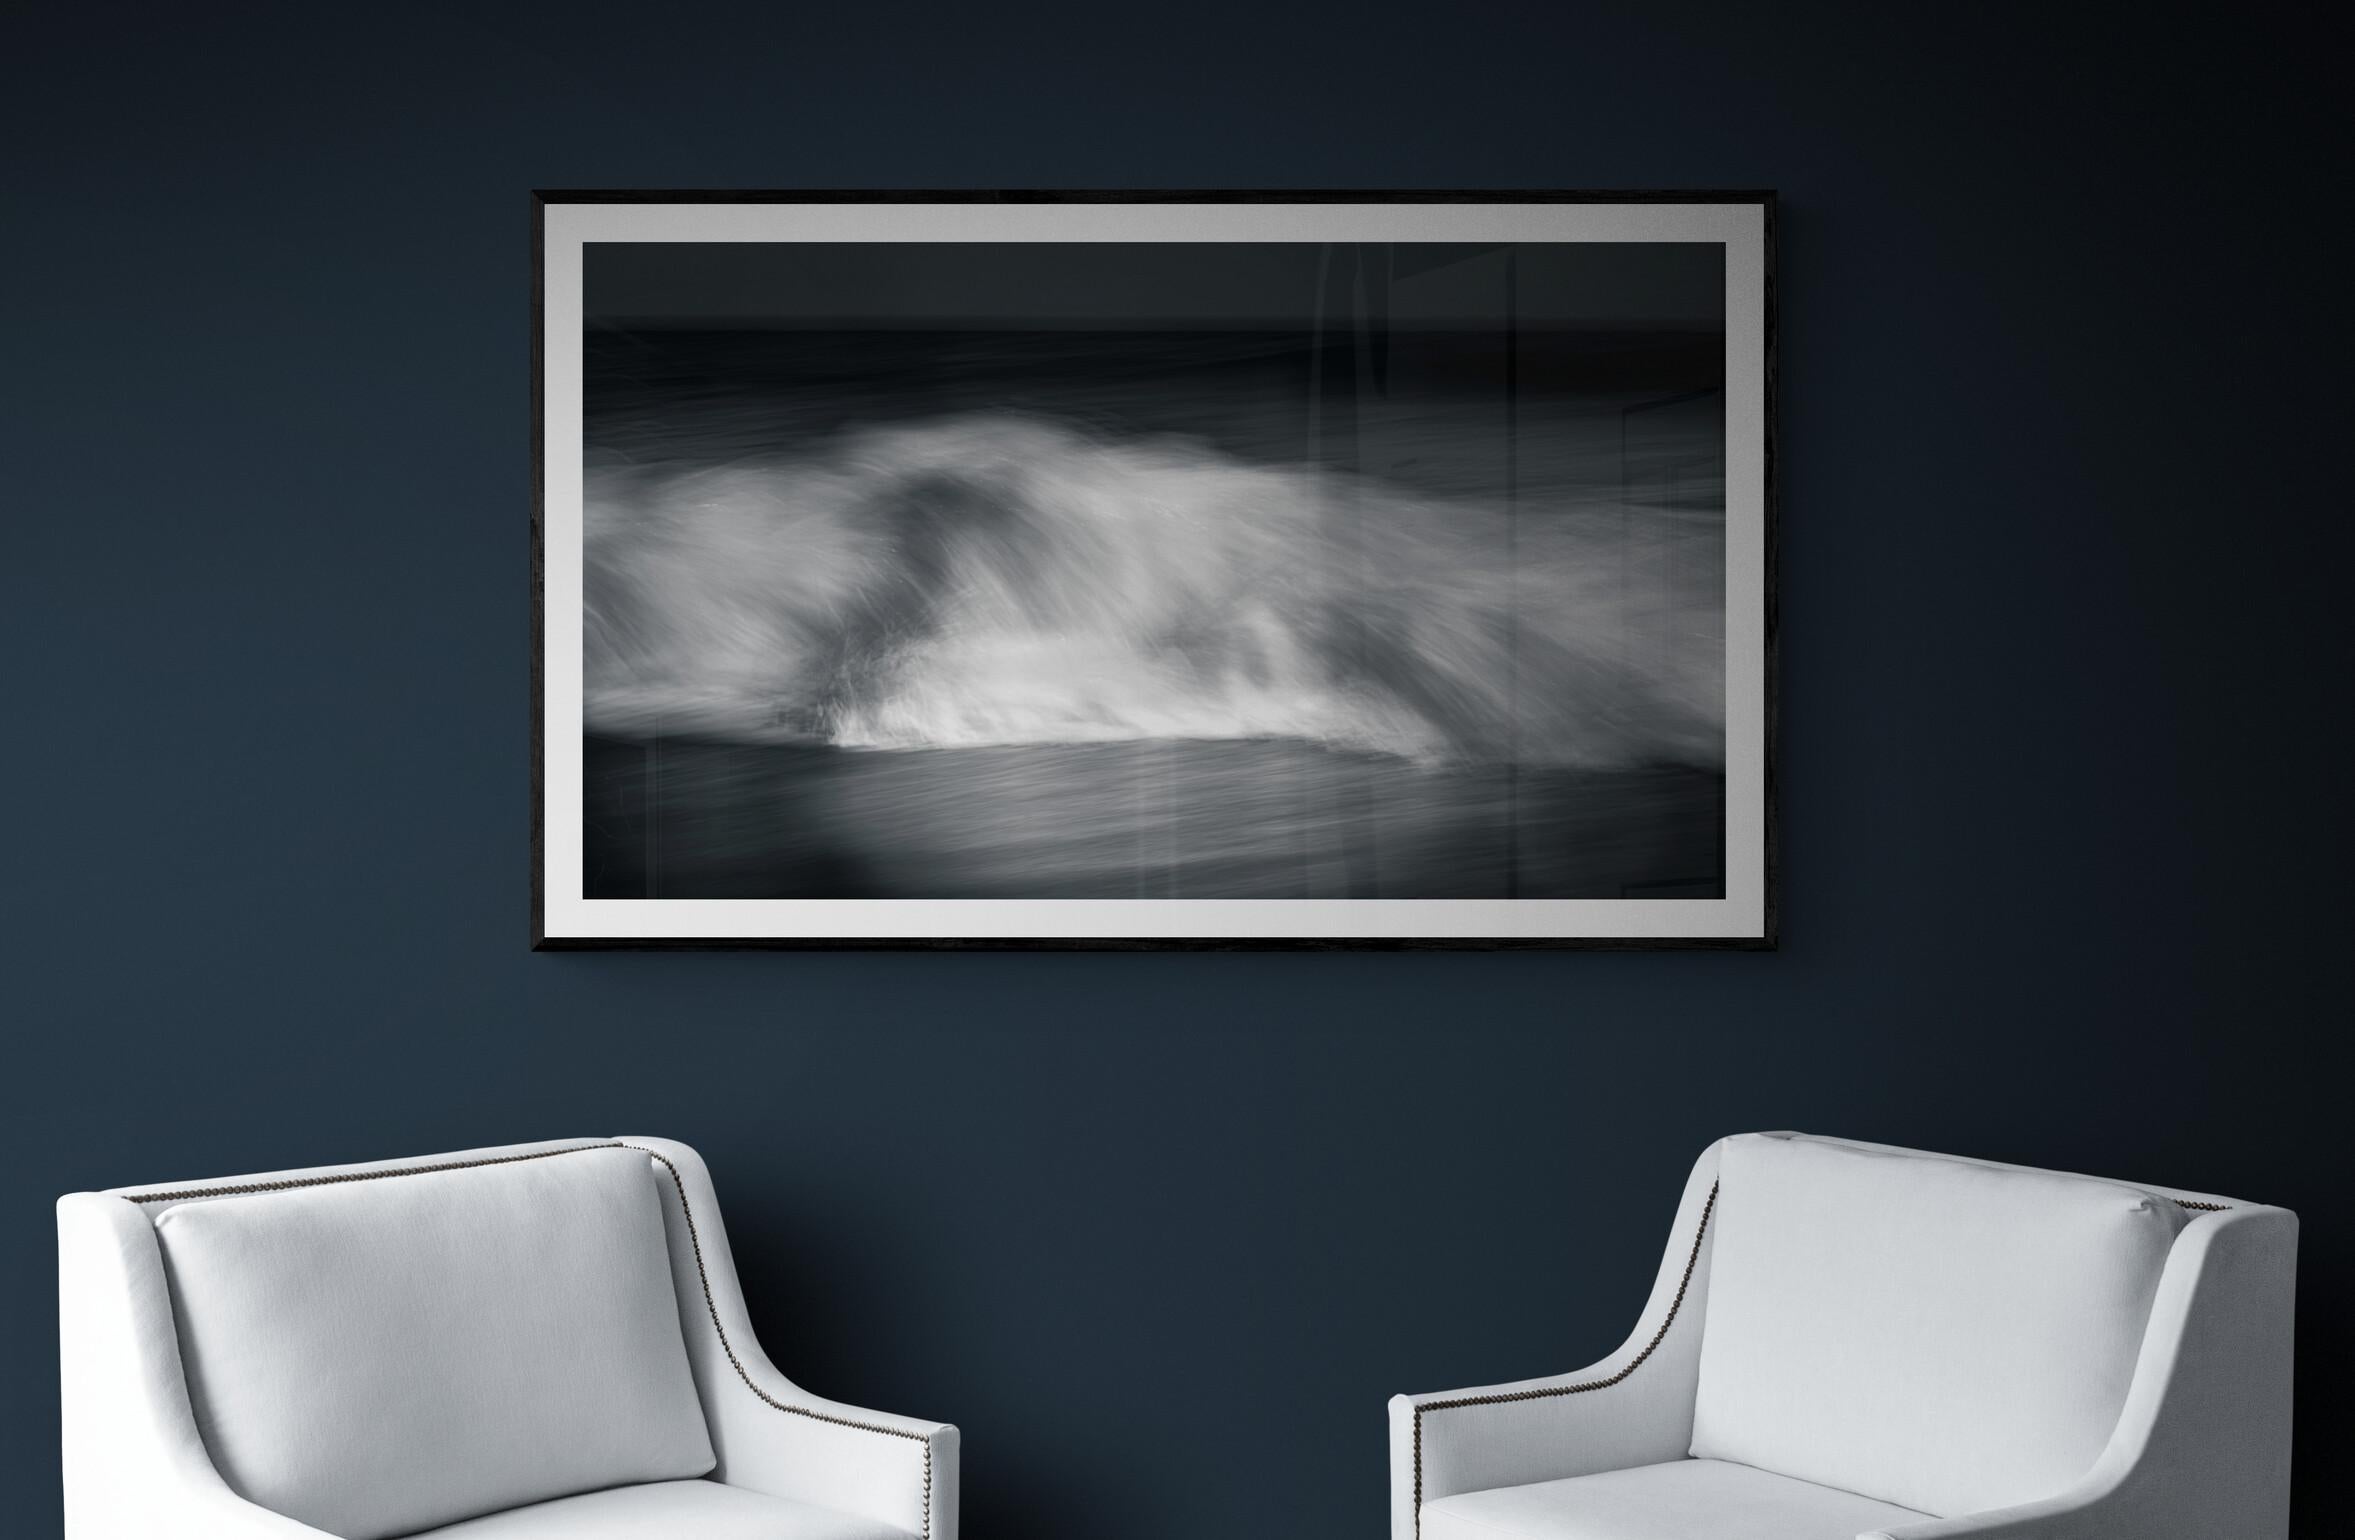 Limited Edition 1 / 7 B & W 20 x 24 Photograph Seascape - Kinetic #37 For Sale 1